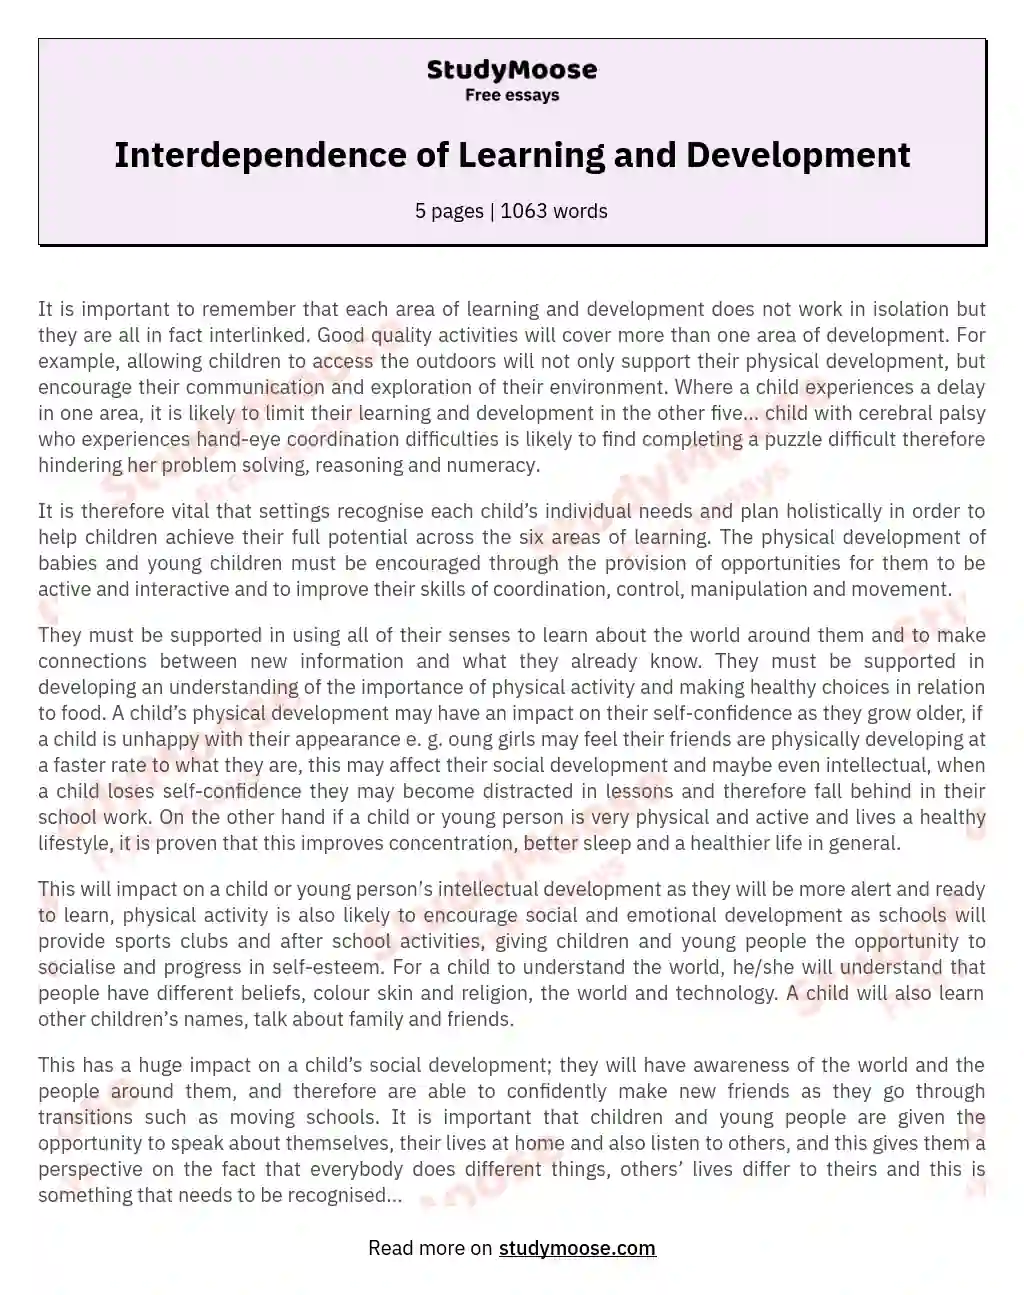 Explain each of the areas of learning and development and how they are interdependent